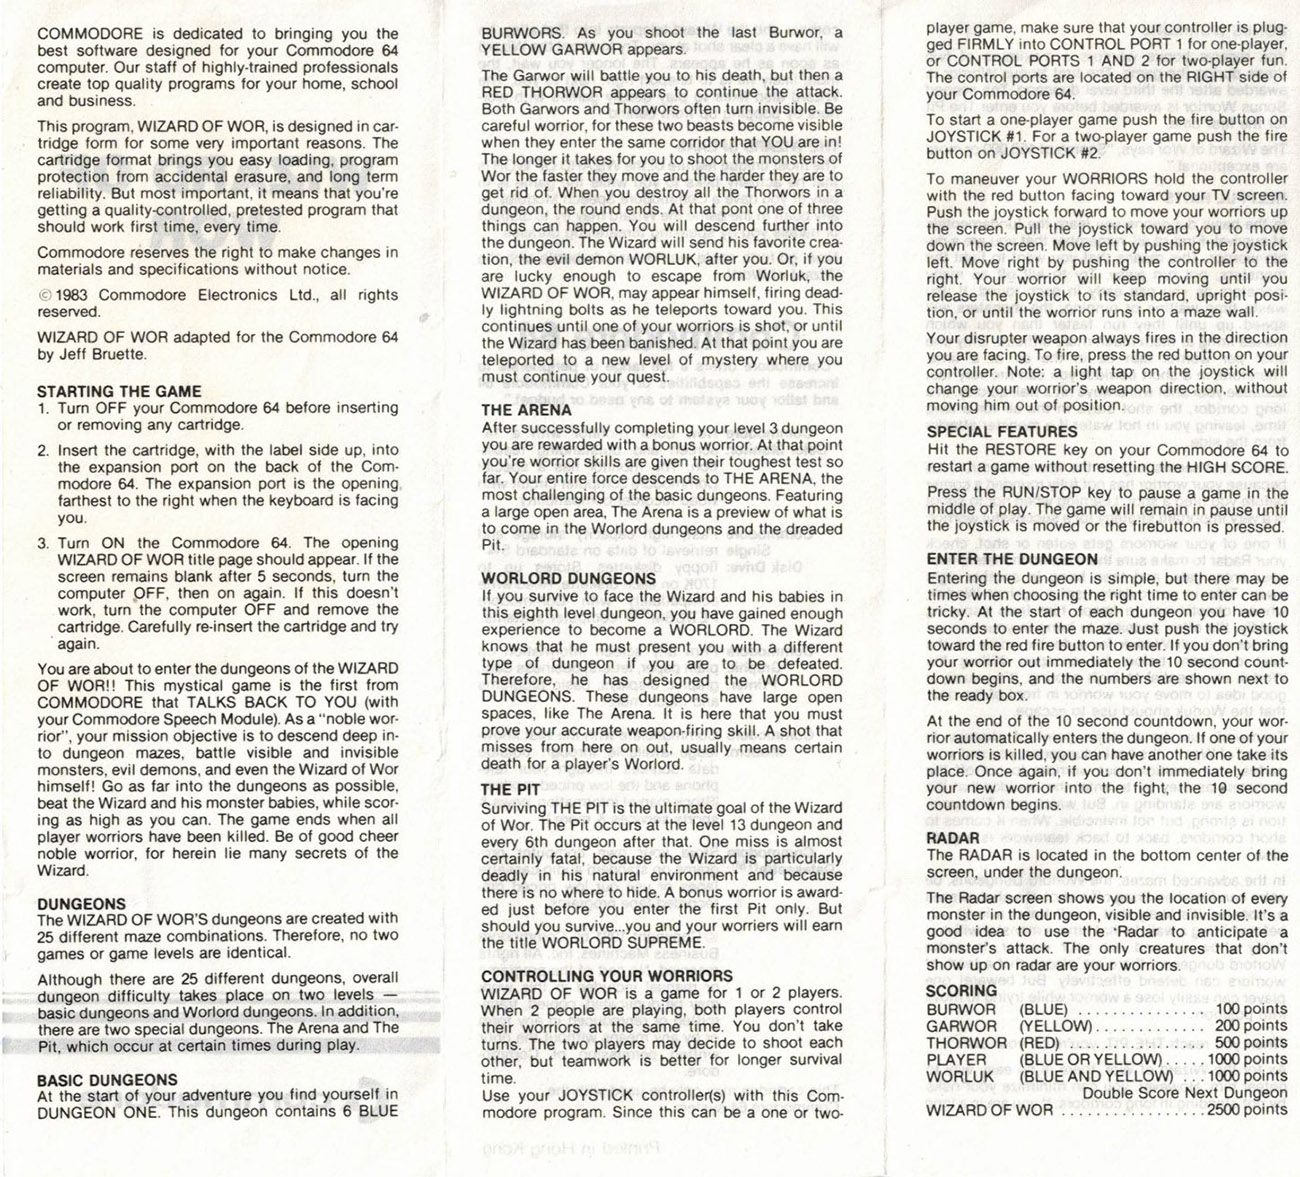 Wizard of Wor manual back